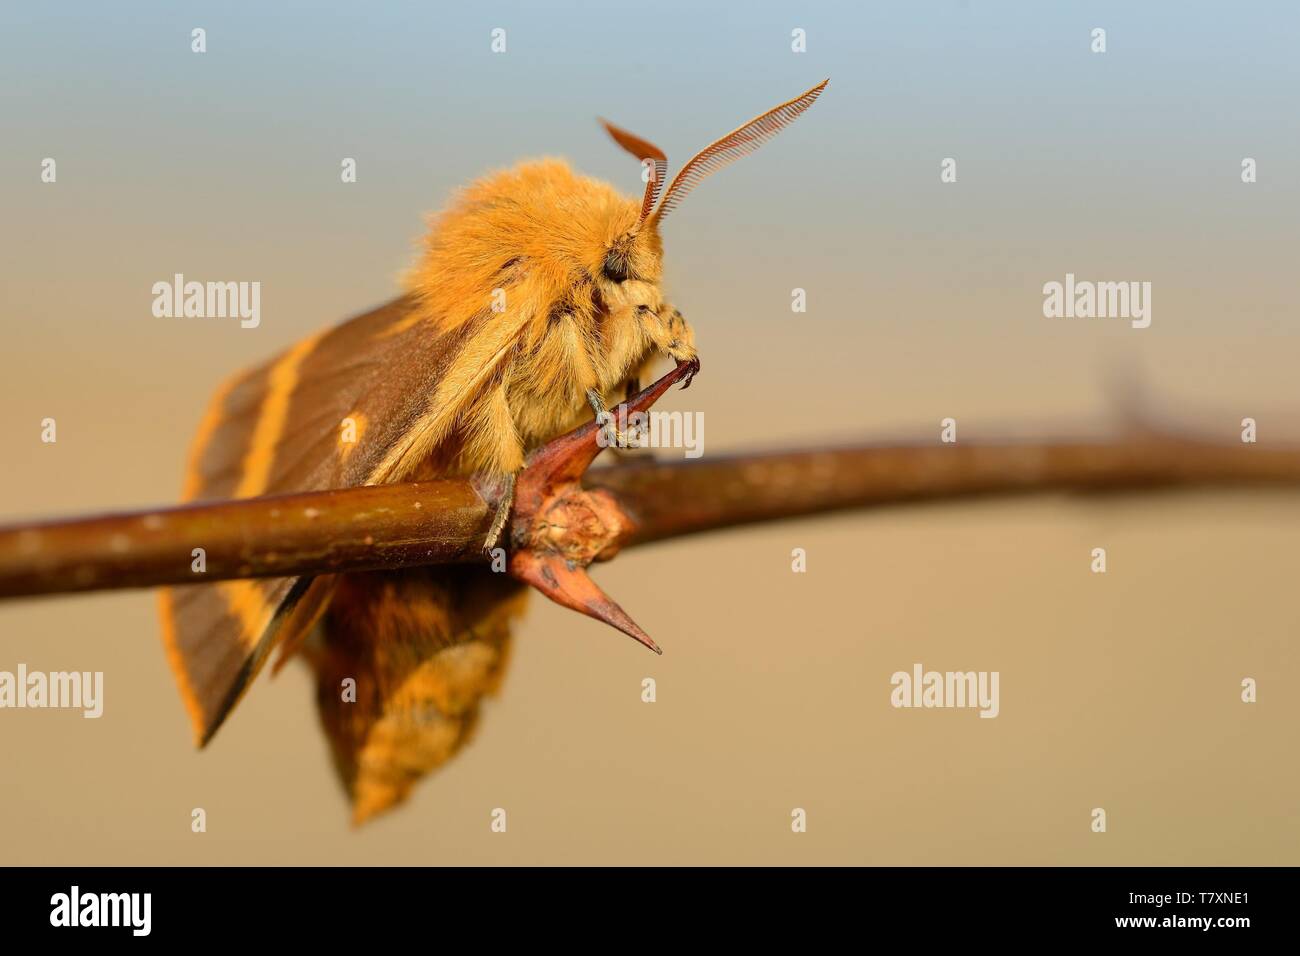 Colorful species of moth (Lemonia dumi) sitting on the dry grass. Orange and brown moth with outspread wings. Orange, brown and green background. Stock Photo